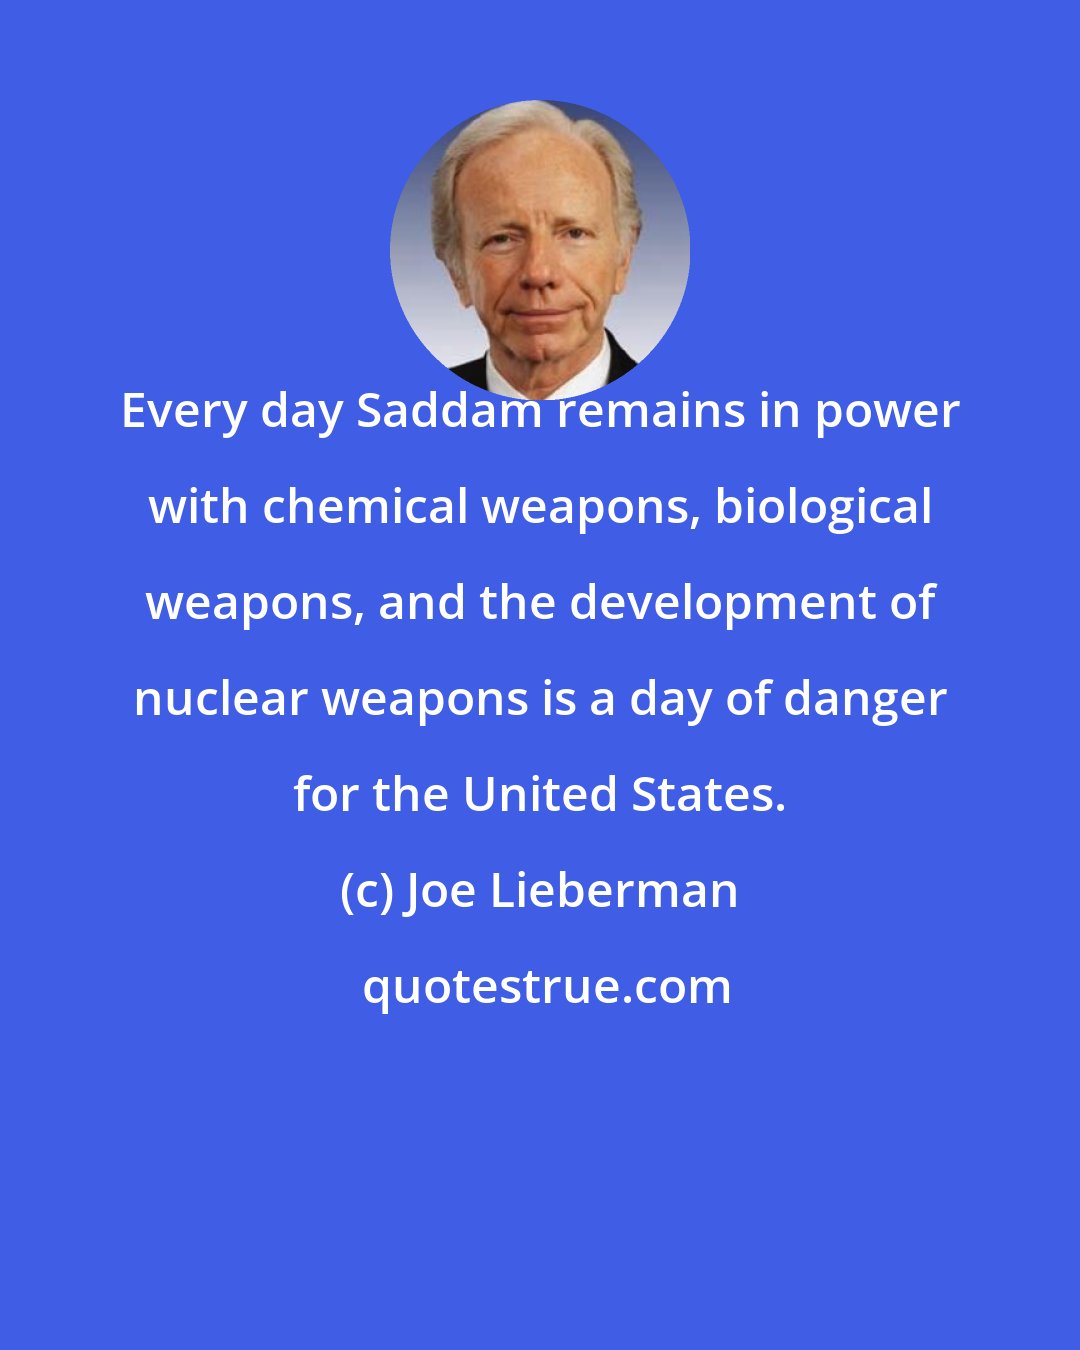 Joe Lieberman: Every day Saddam remains in power with chemical weapons, biological weapons, and the development of nuclear weapons is a day of danger for the United States.